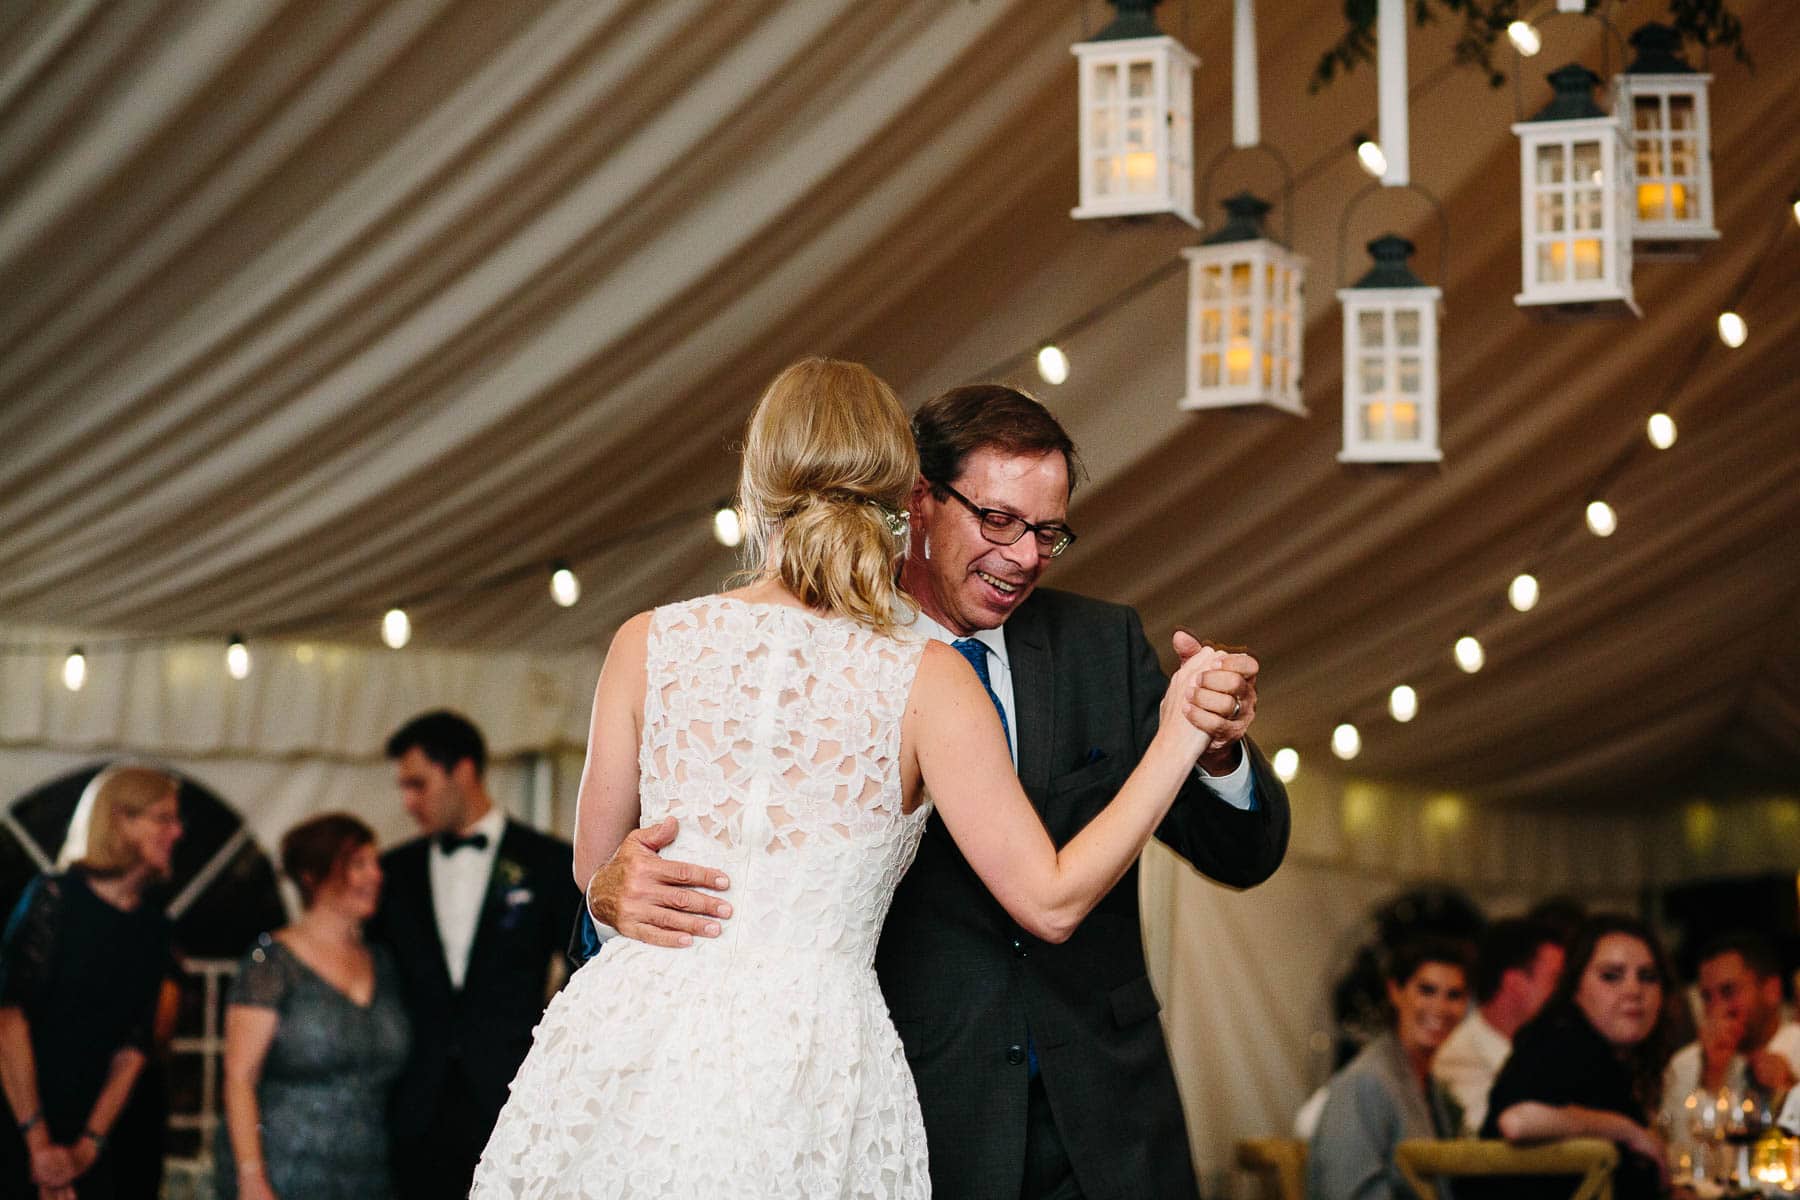 father-daughter dance | Kelly Benvenuto Photography